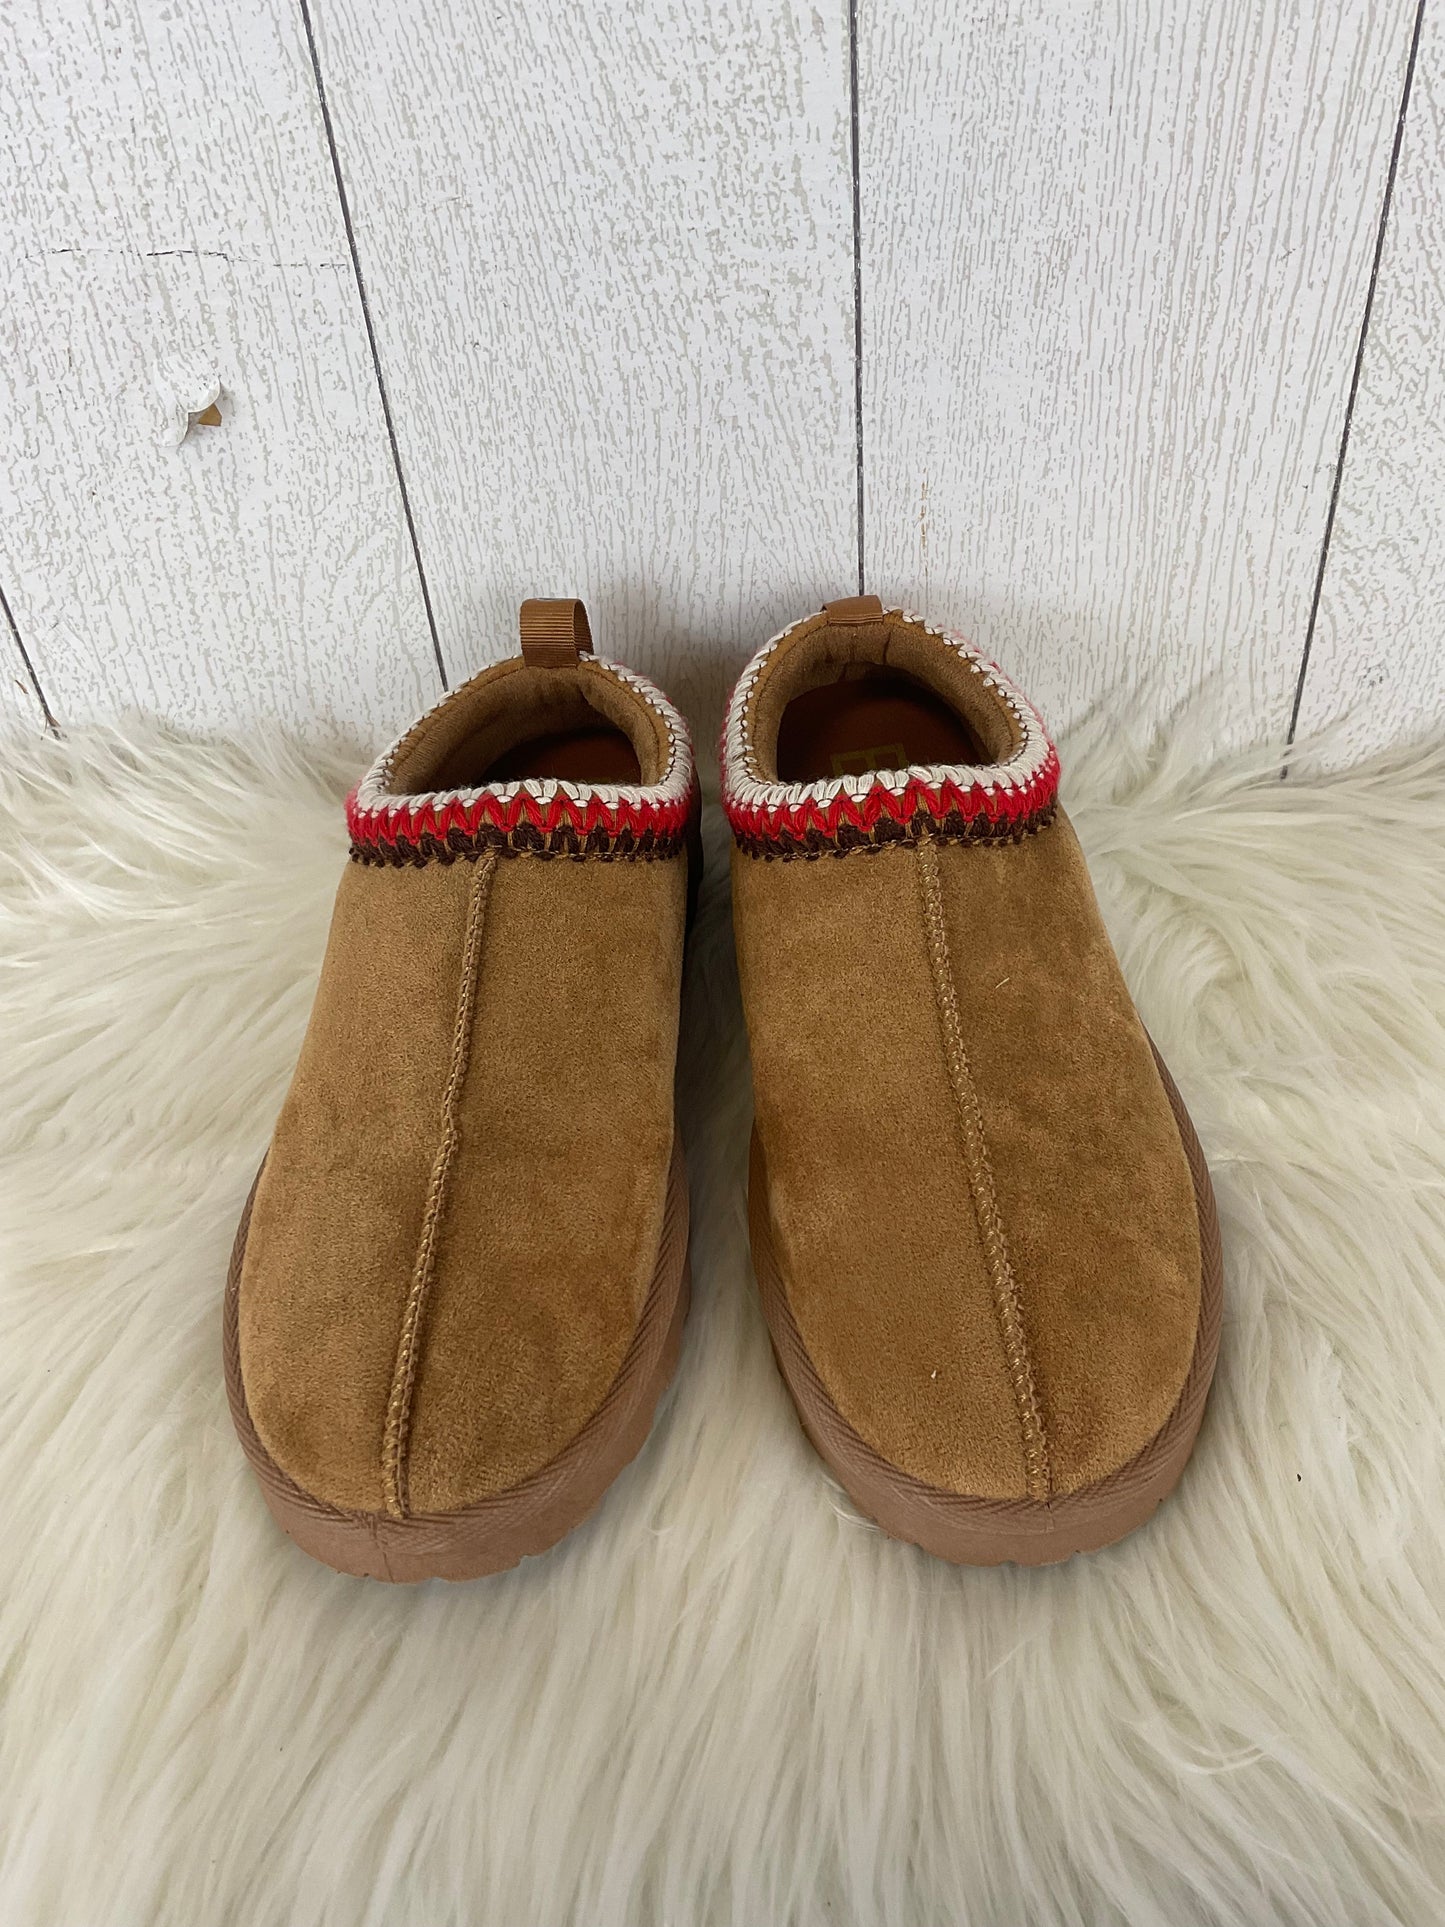 Brown Slippers Matisse, Size 8